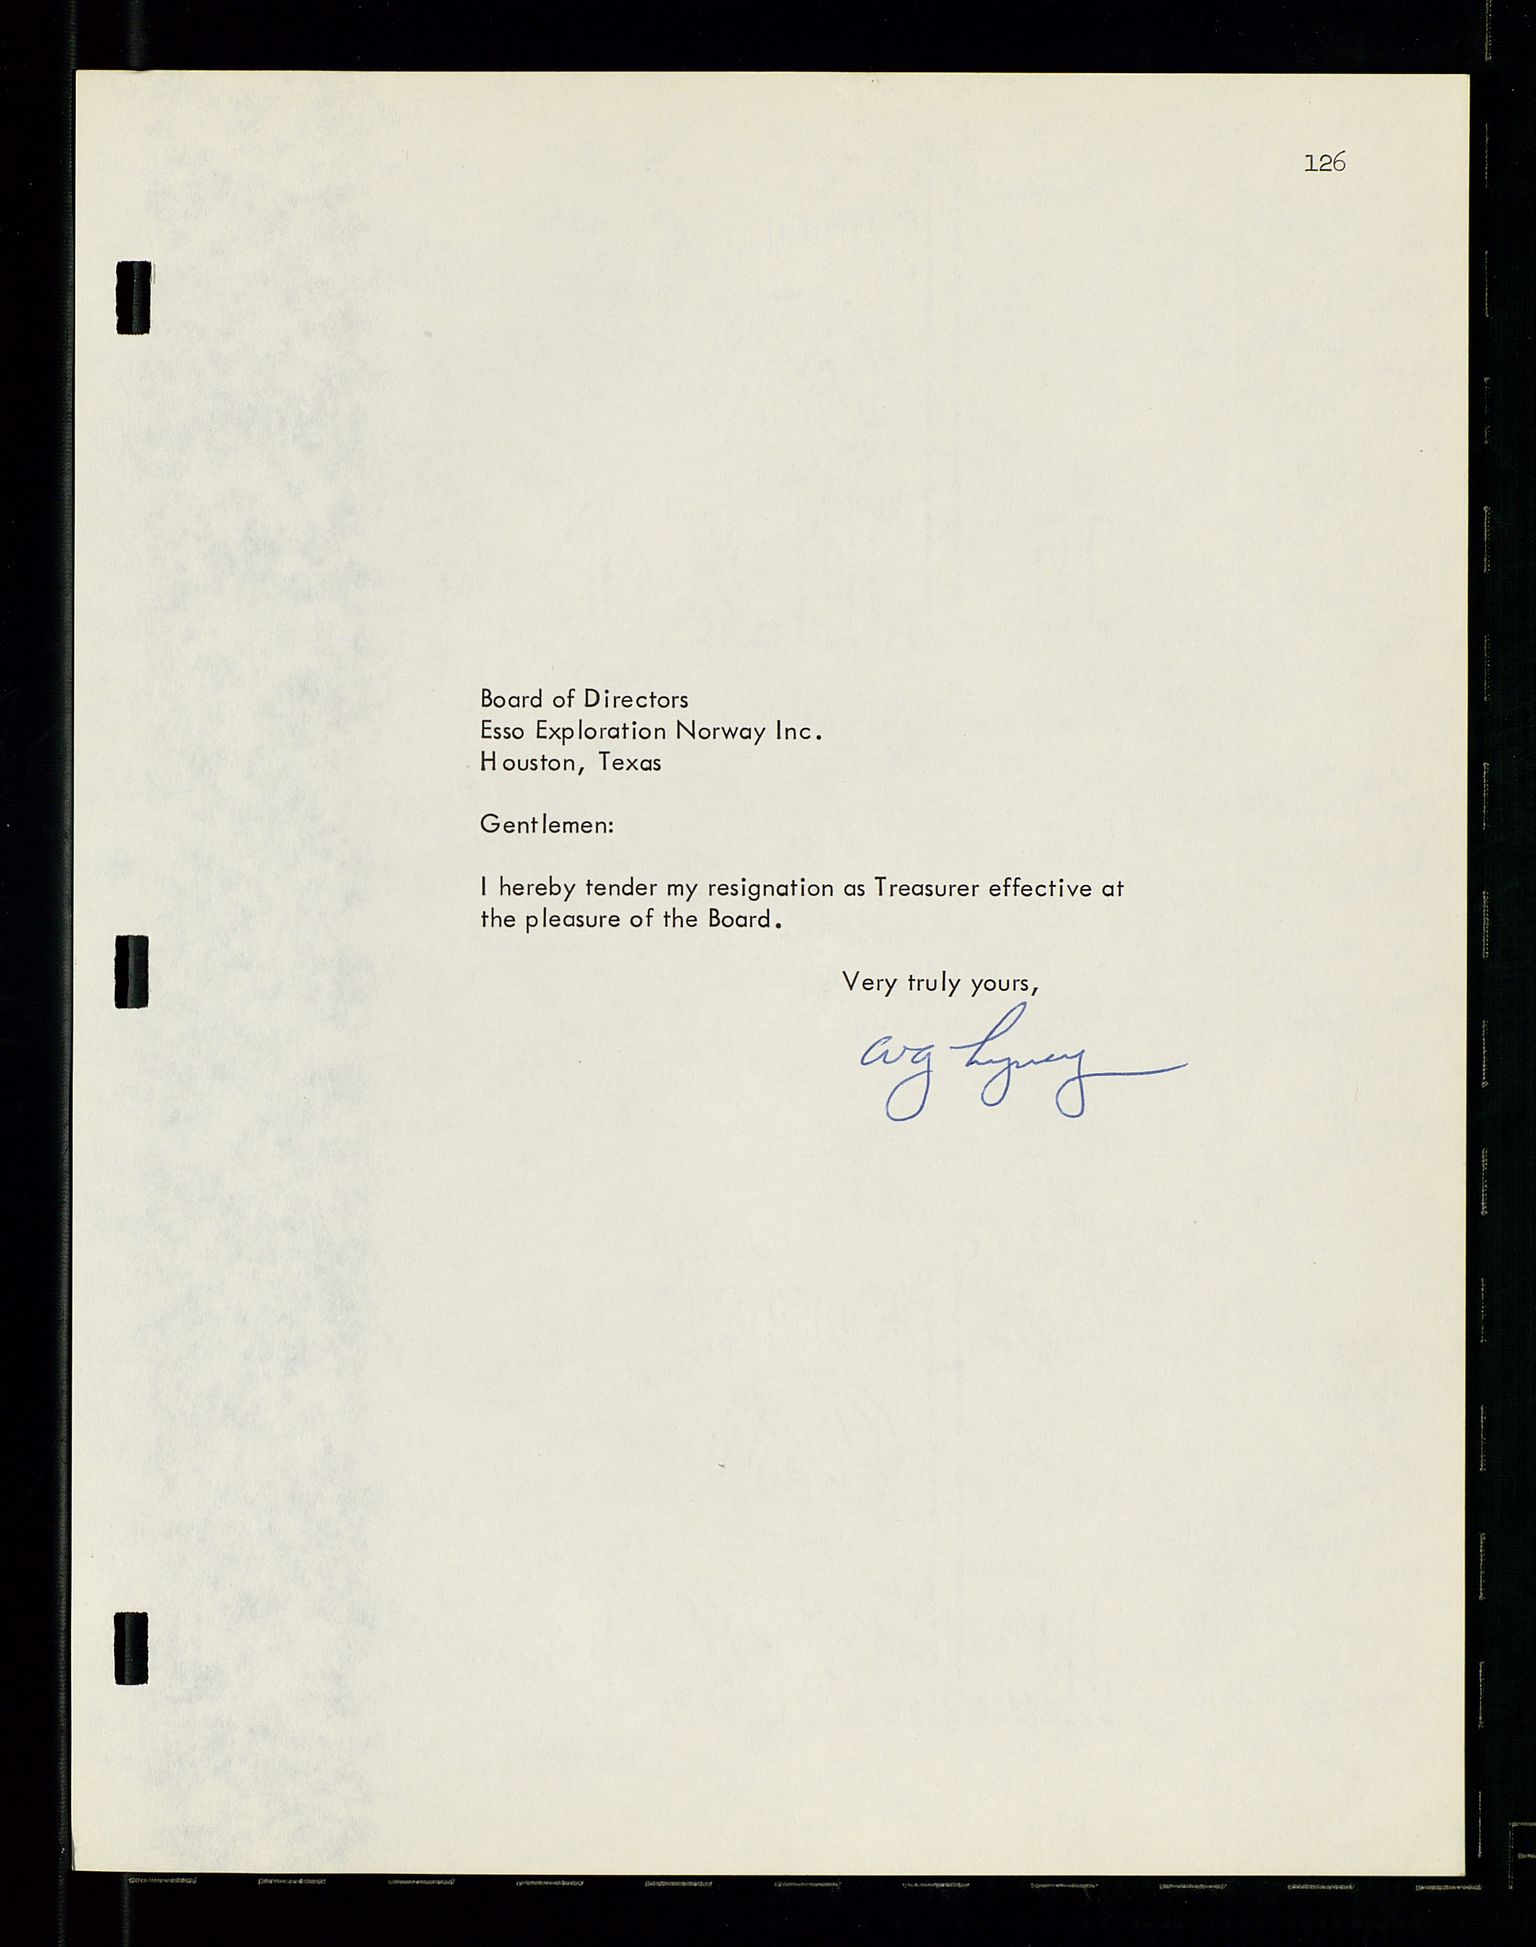 Pa 1512 - Esso Exploration and Production Norway Inc., SAST/A-101917/A/Aa/L0001/0001: Styredokumenter / Corporate records, By-Laws, Board meeting minutes, Incorporations, 1965-1975, p. 126